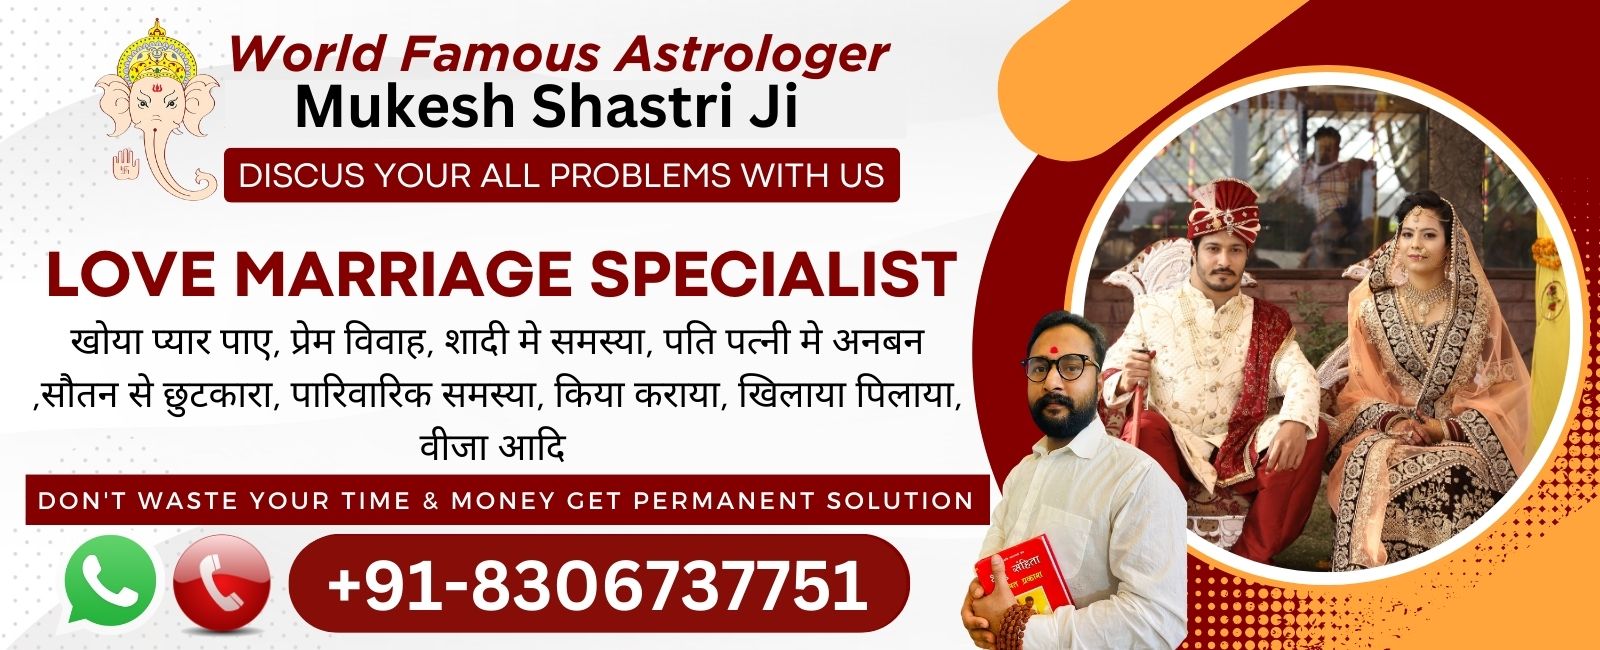 You are currently viewing Love Marriage Specialist Baba Astrologer online